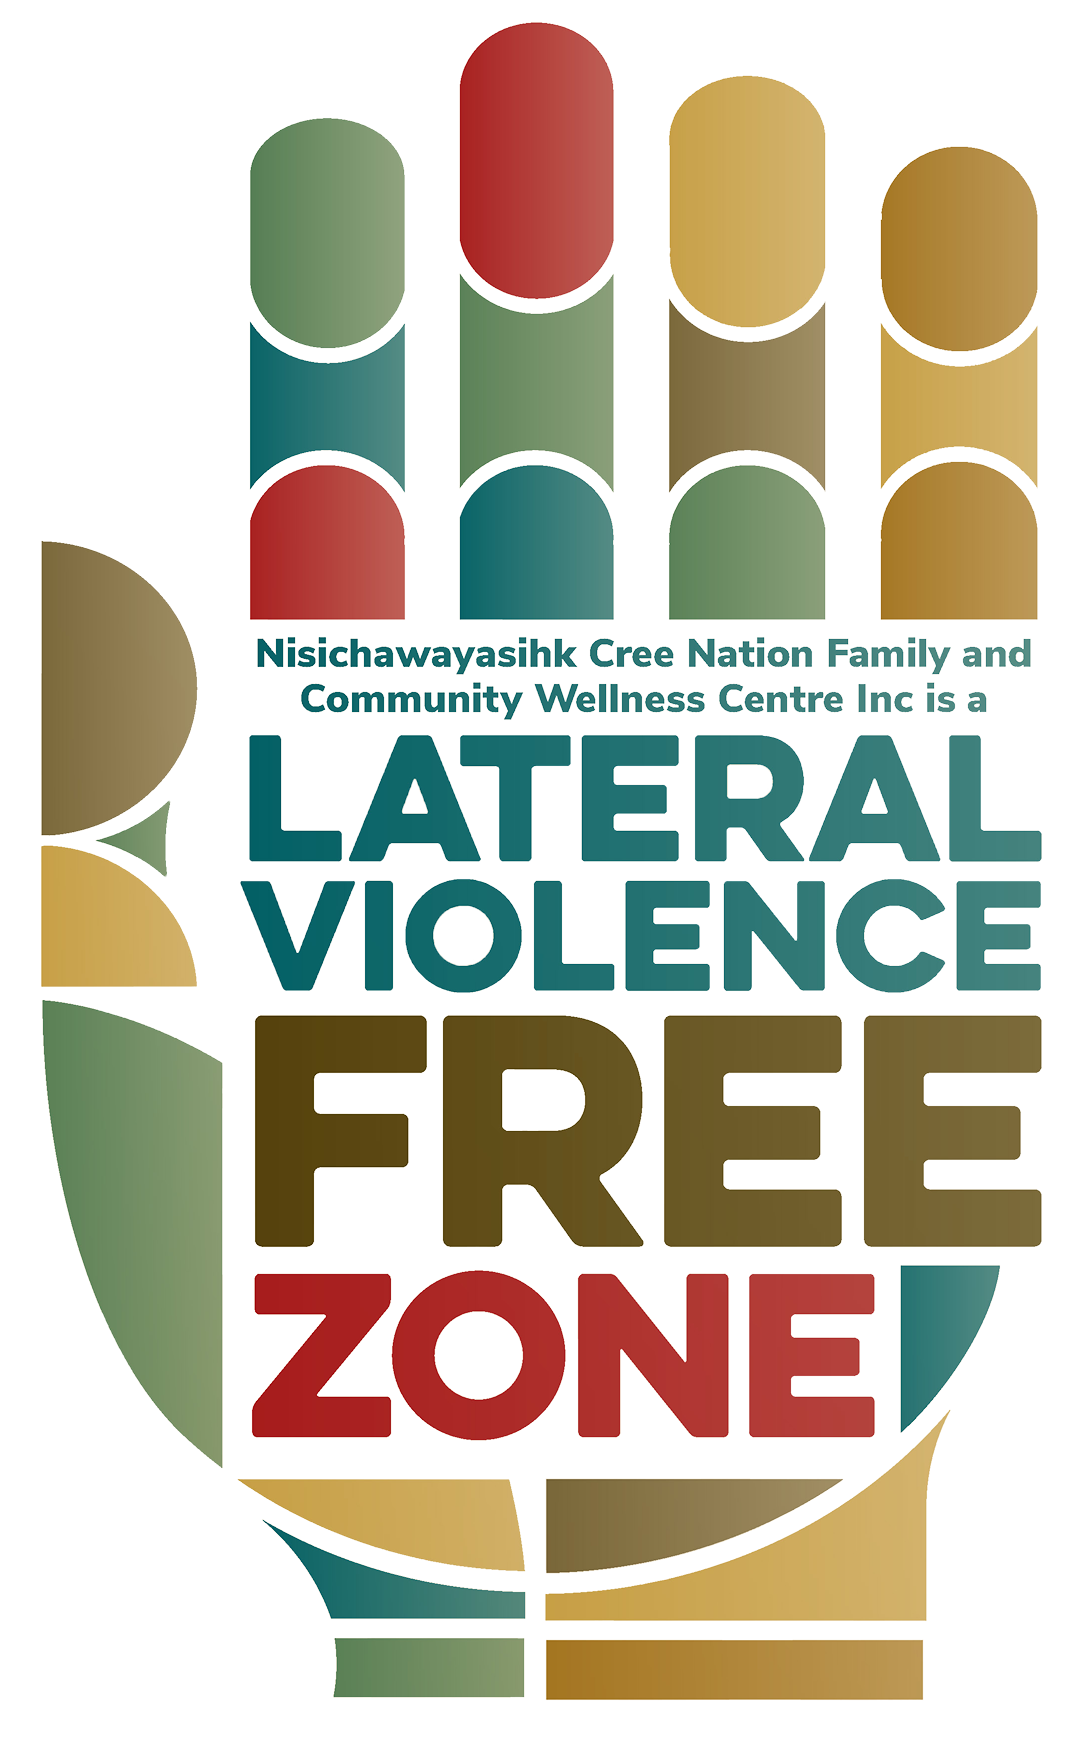 Lateral Violence Free Zone